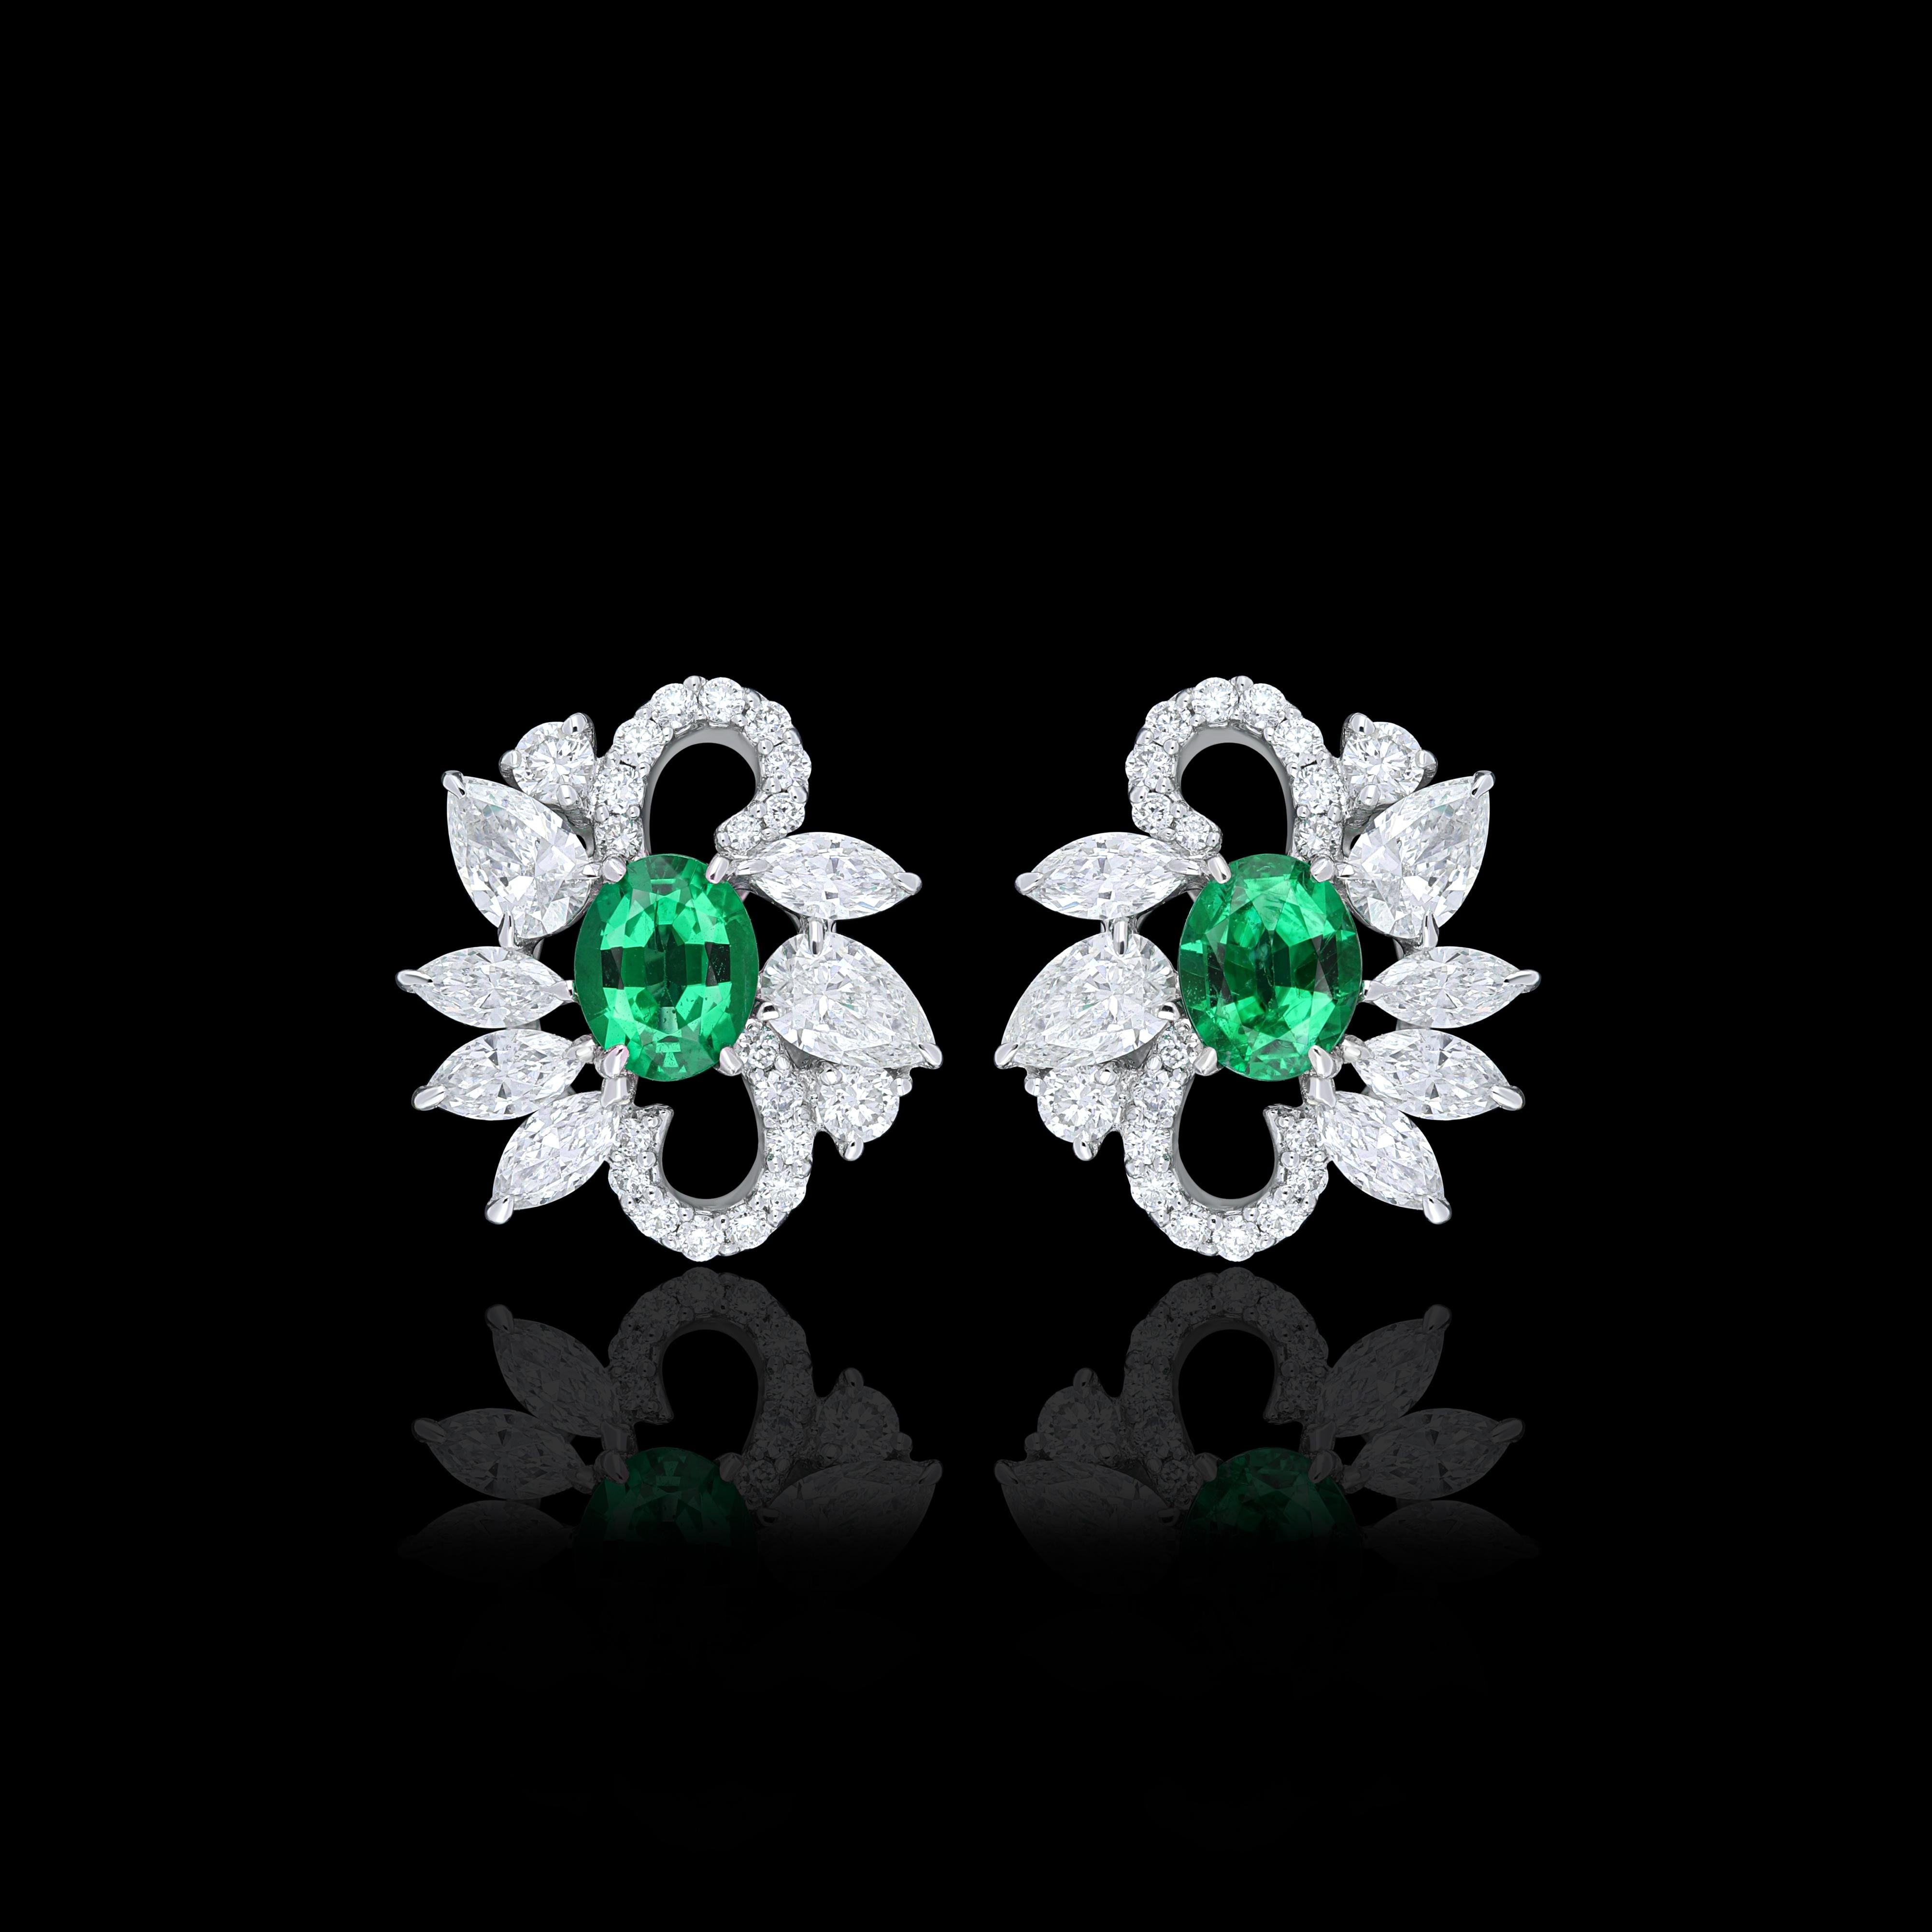 Elegant and exquisitely detailed 18 Karat White Gold Earring, center set with 0.56Cts .Oval Shape Emerald and micro pave set Diamonds, weighing approx. 1.14Cts Beautifully Hand crafted in 18 Karat White Gold.

Stone Detail:
Emerald: 5x4MM

Stone